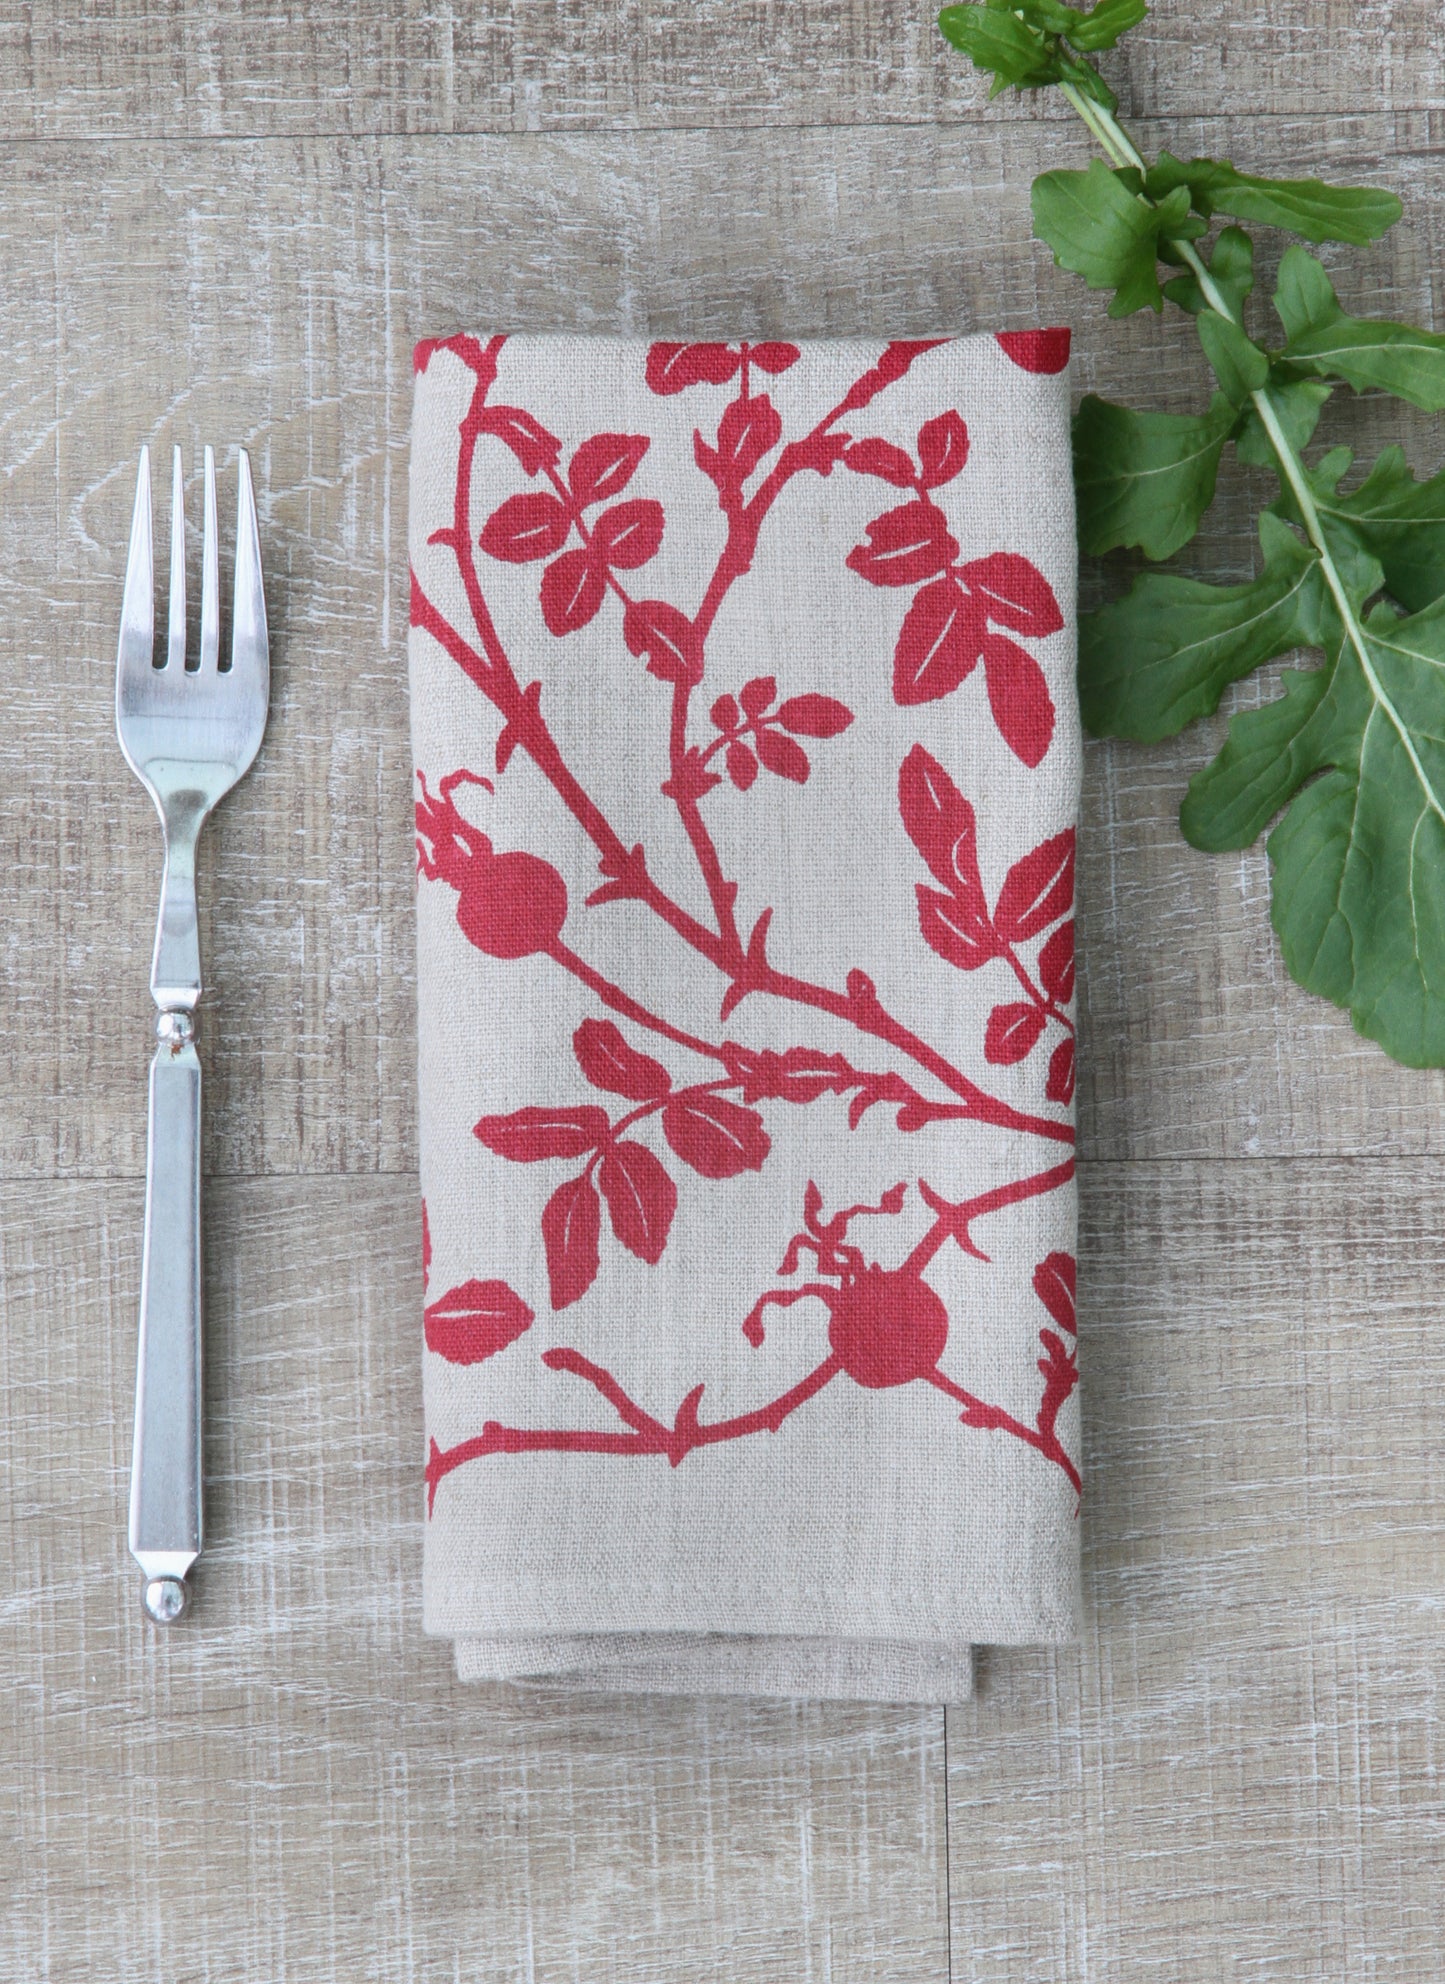 Nootka Rose Napkin in Posy Pink on Natural Flax Linen